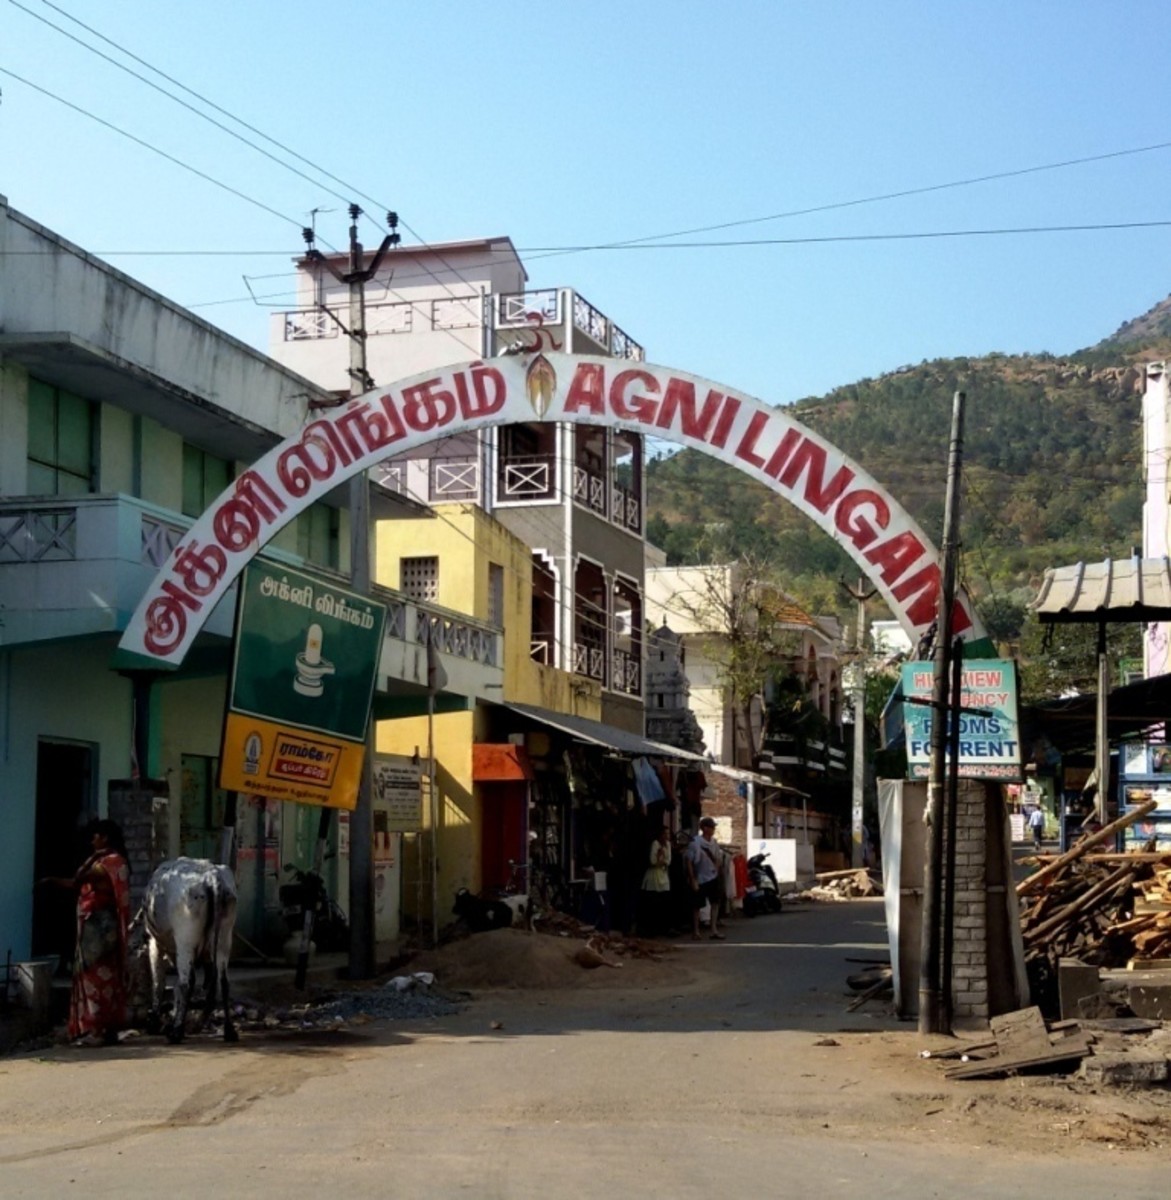 The gate of the temple of Agni Lingam